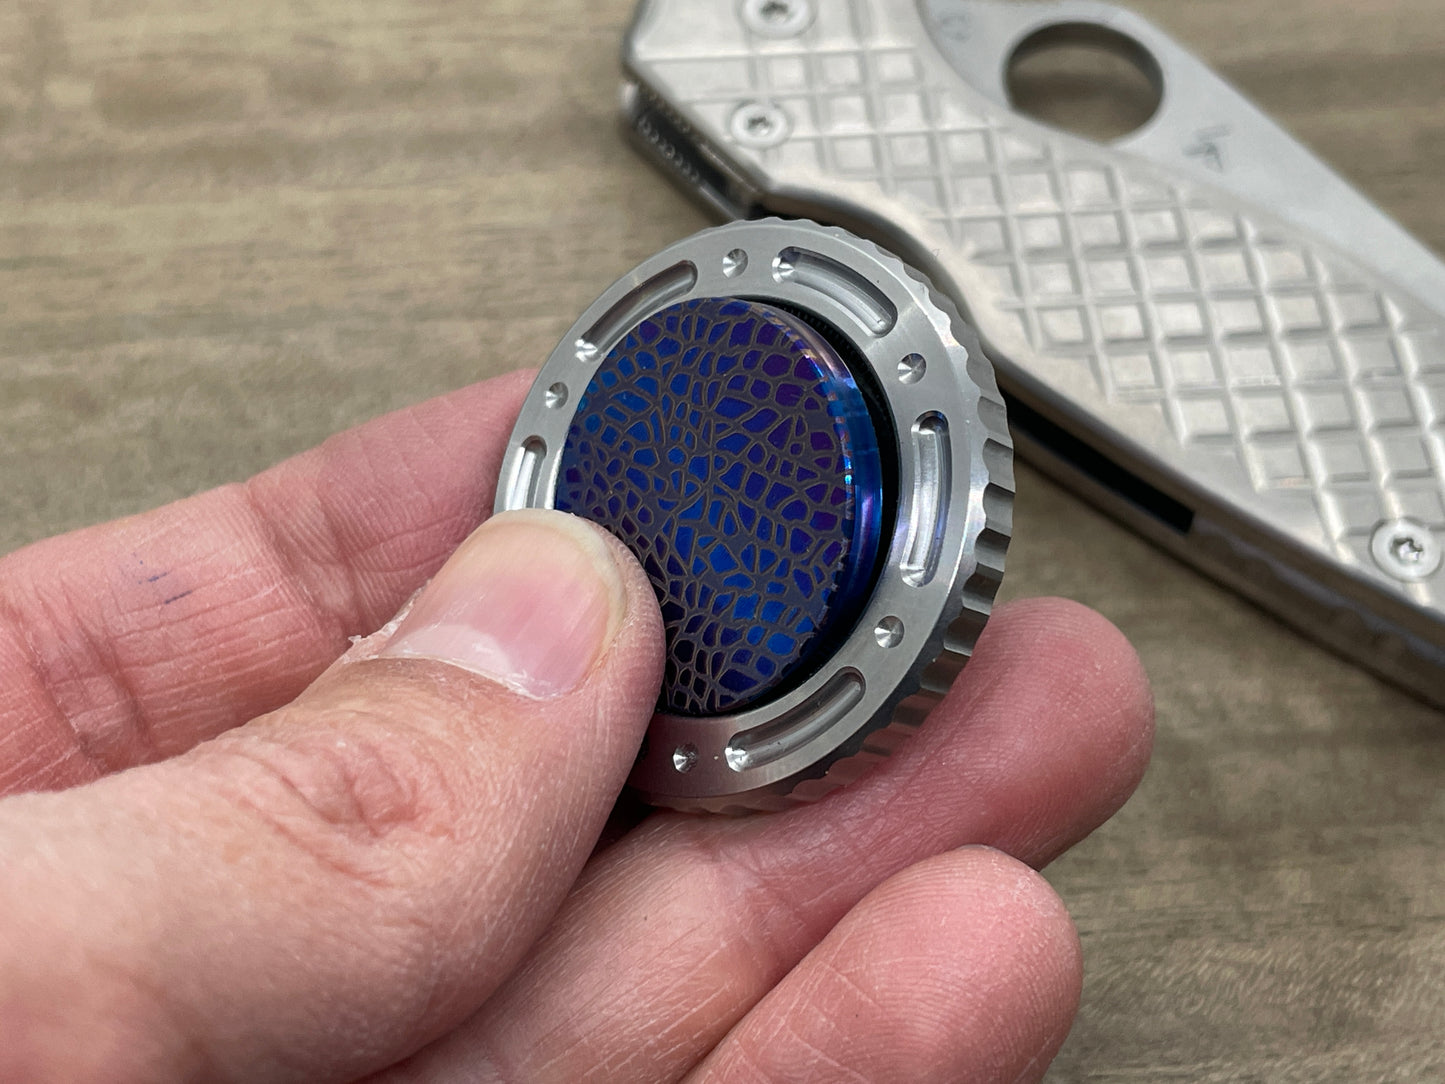 Nebula Flamed Titanium Coin for Billetspin GAMBIT